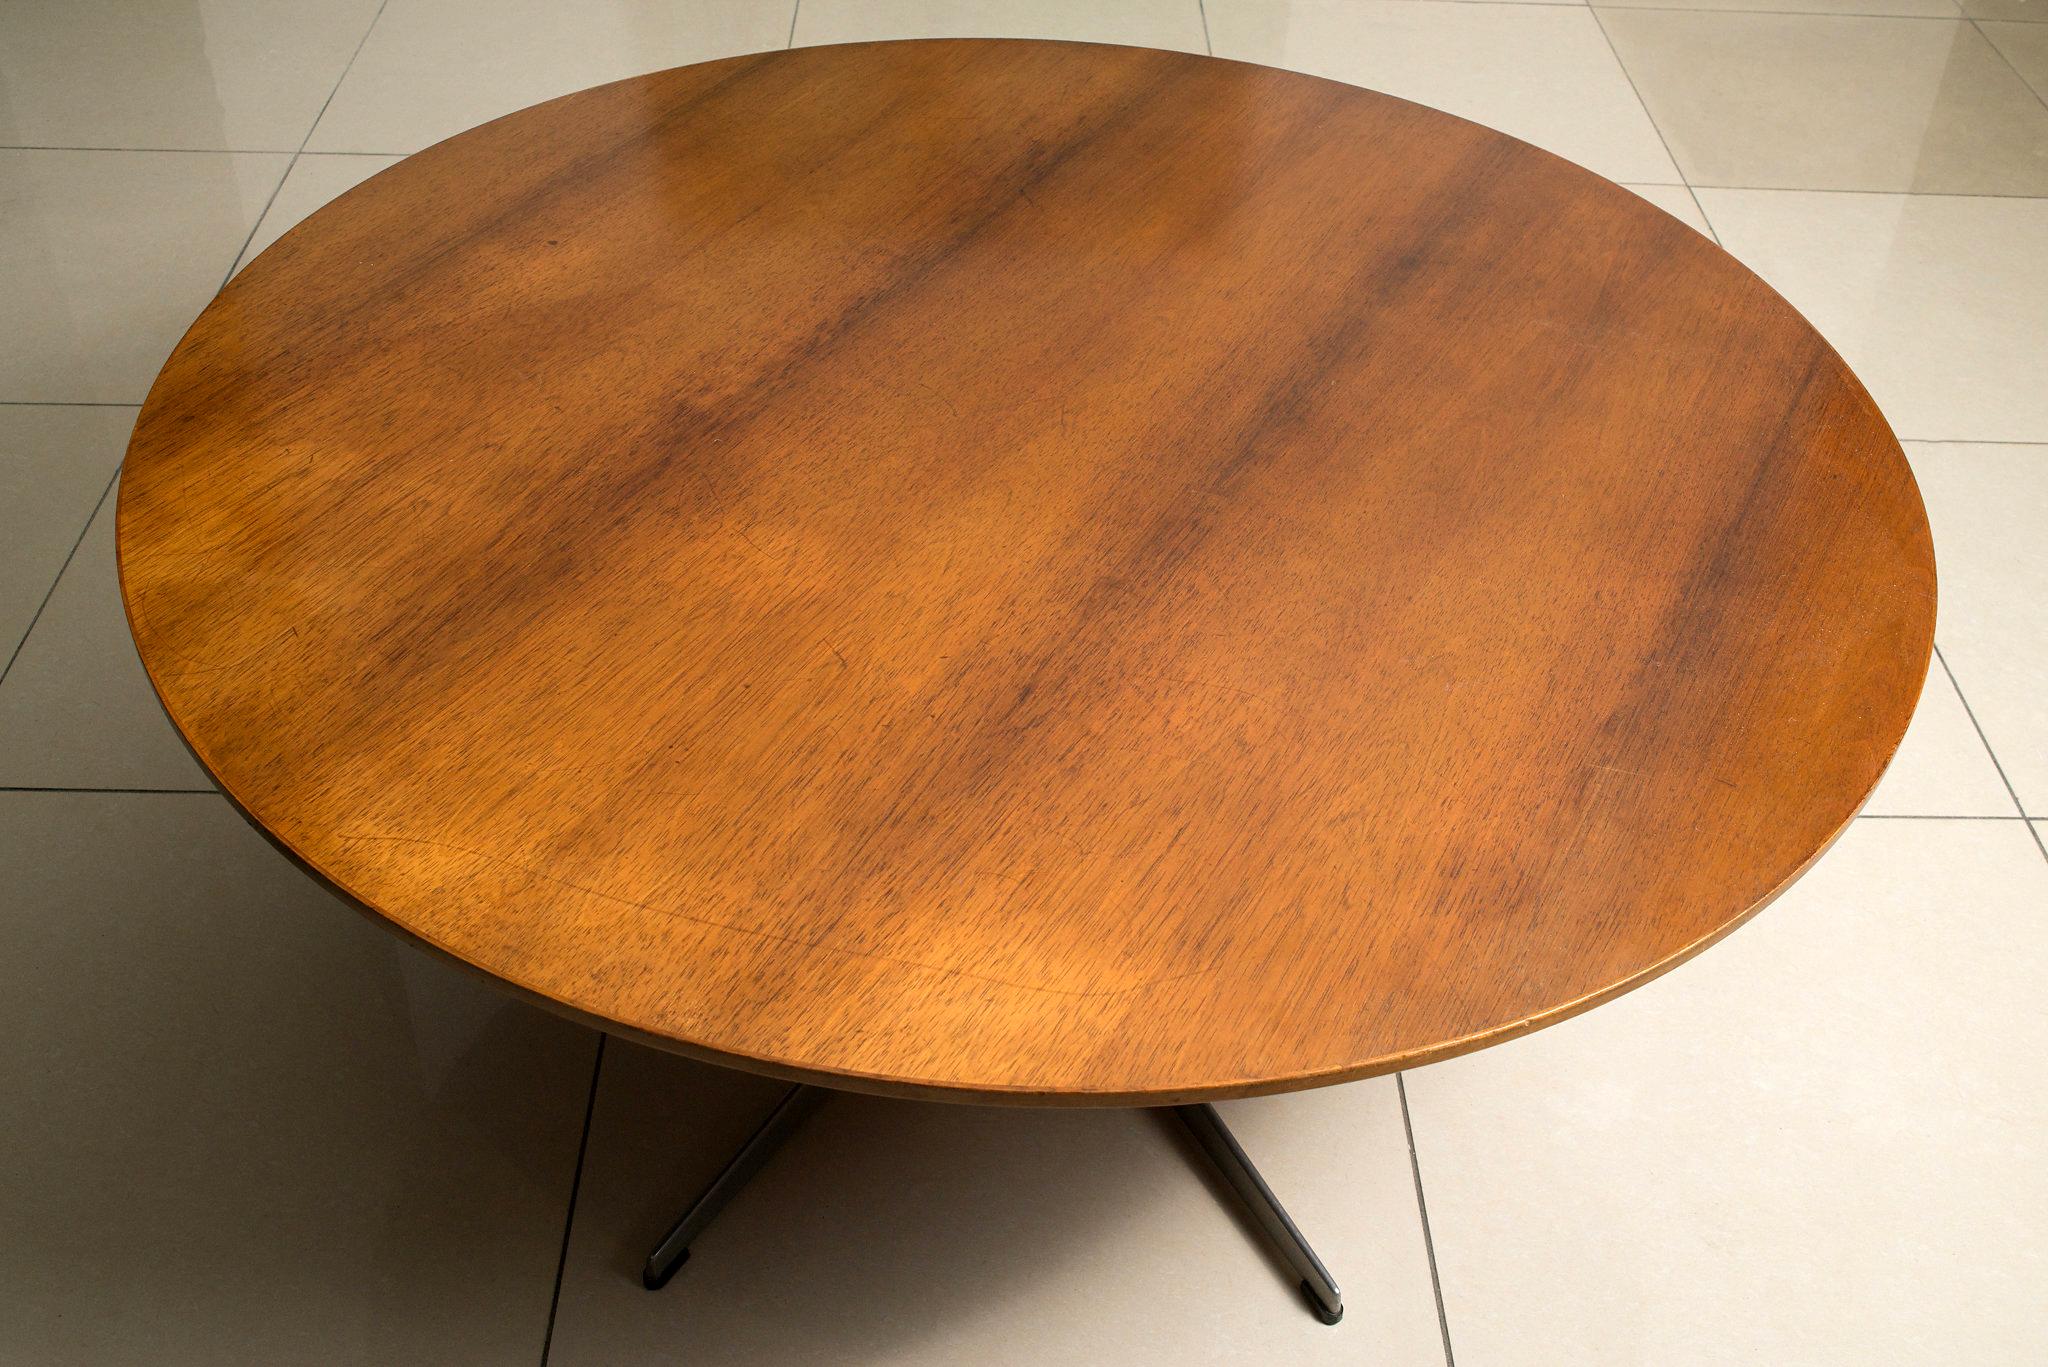 Arne Jacobsen Six-Star Series Rosewood Coffee Table for Fritz Hansen For Sale 1